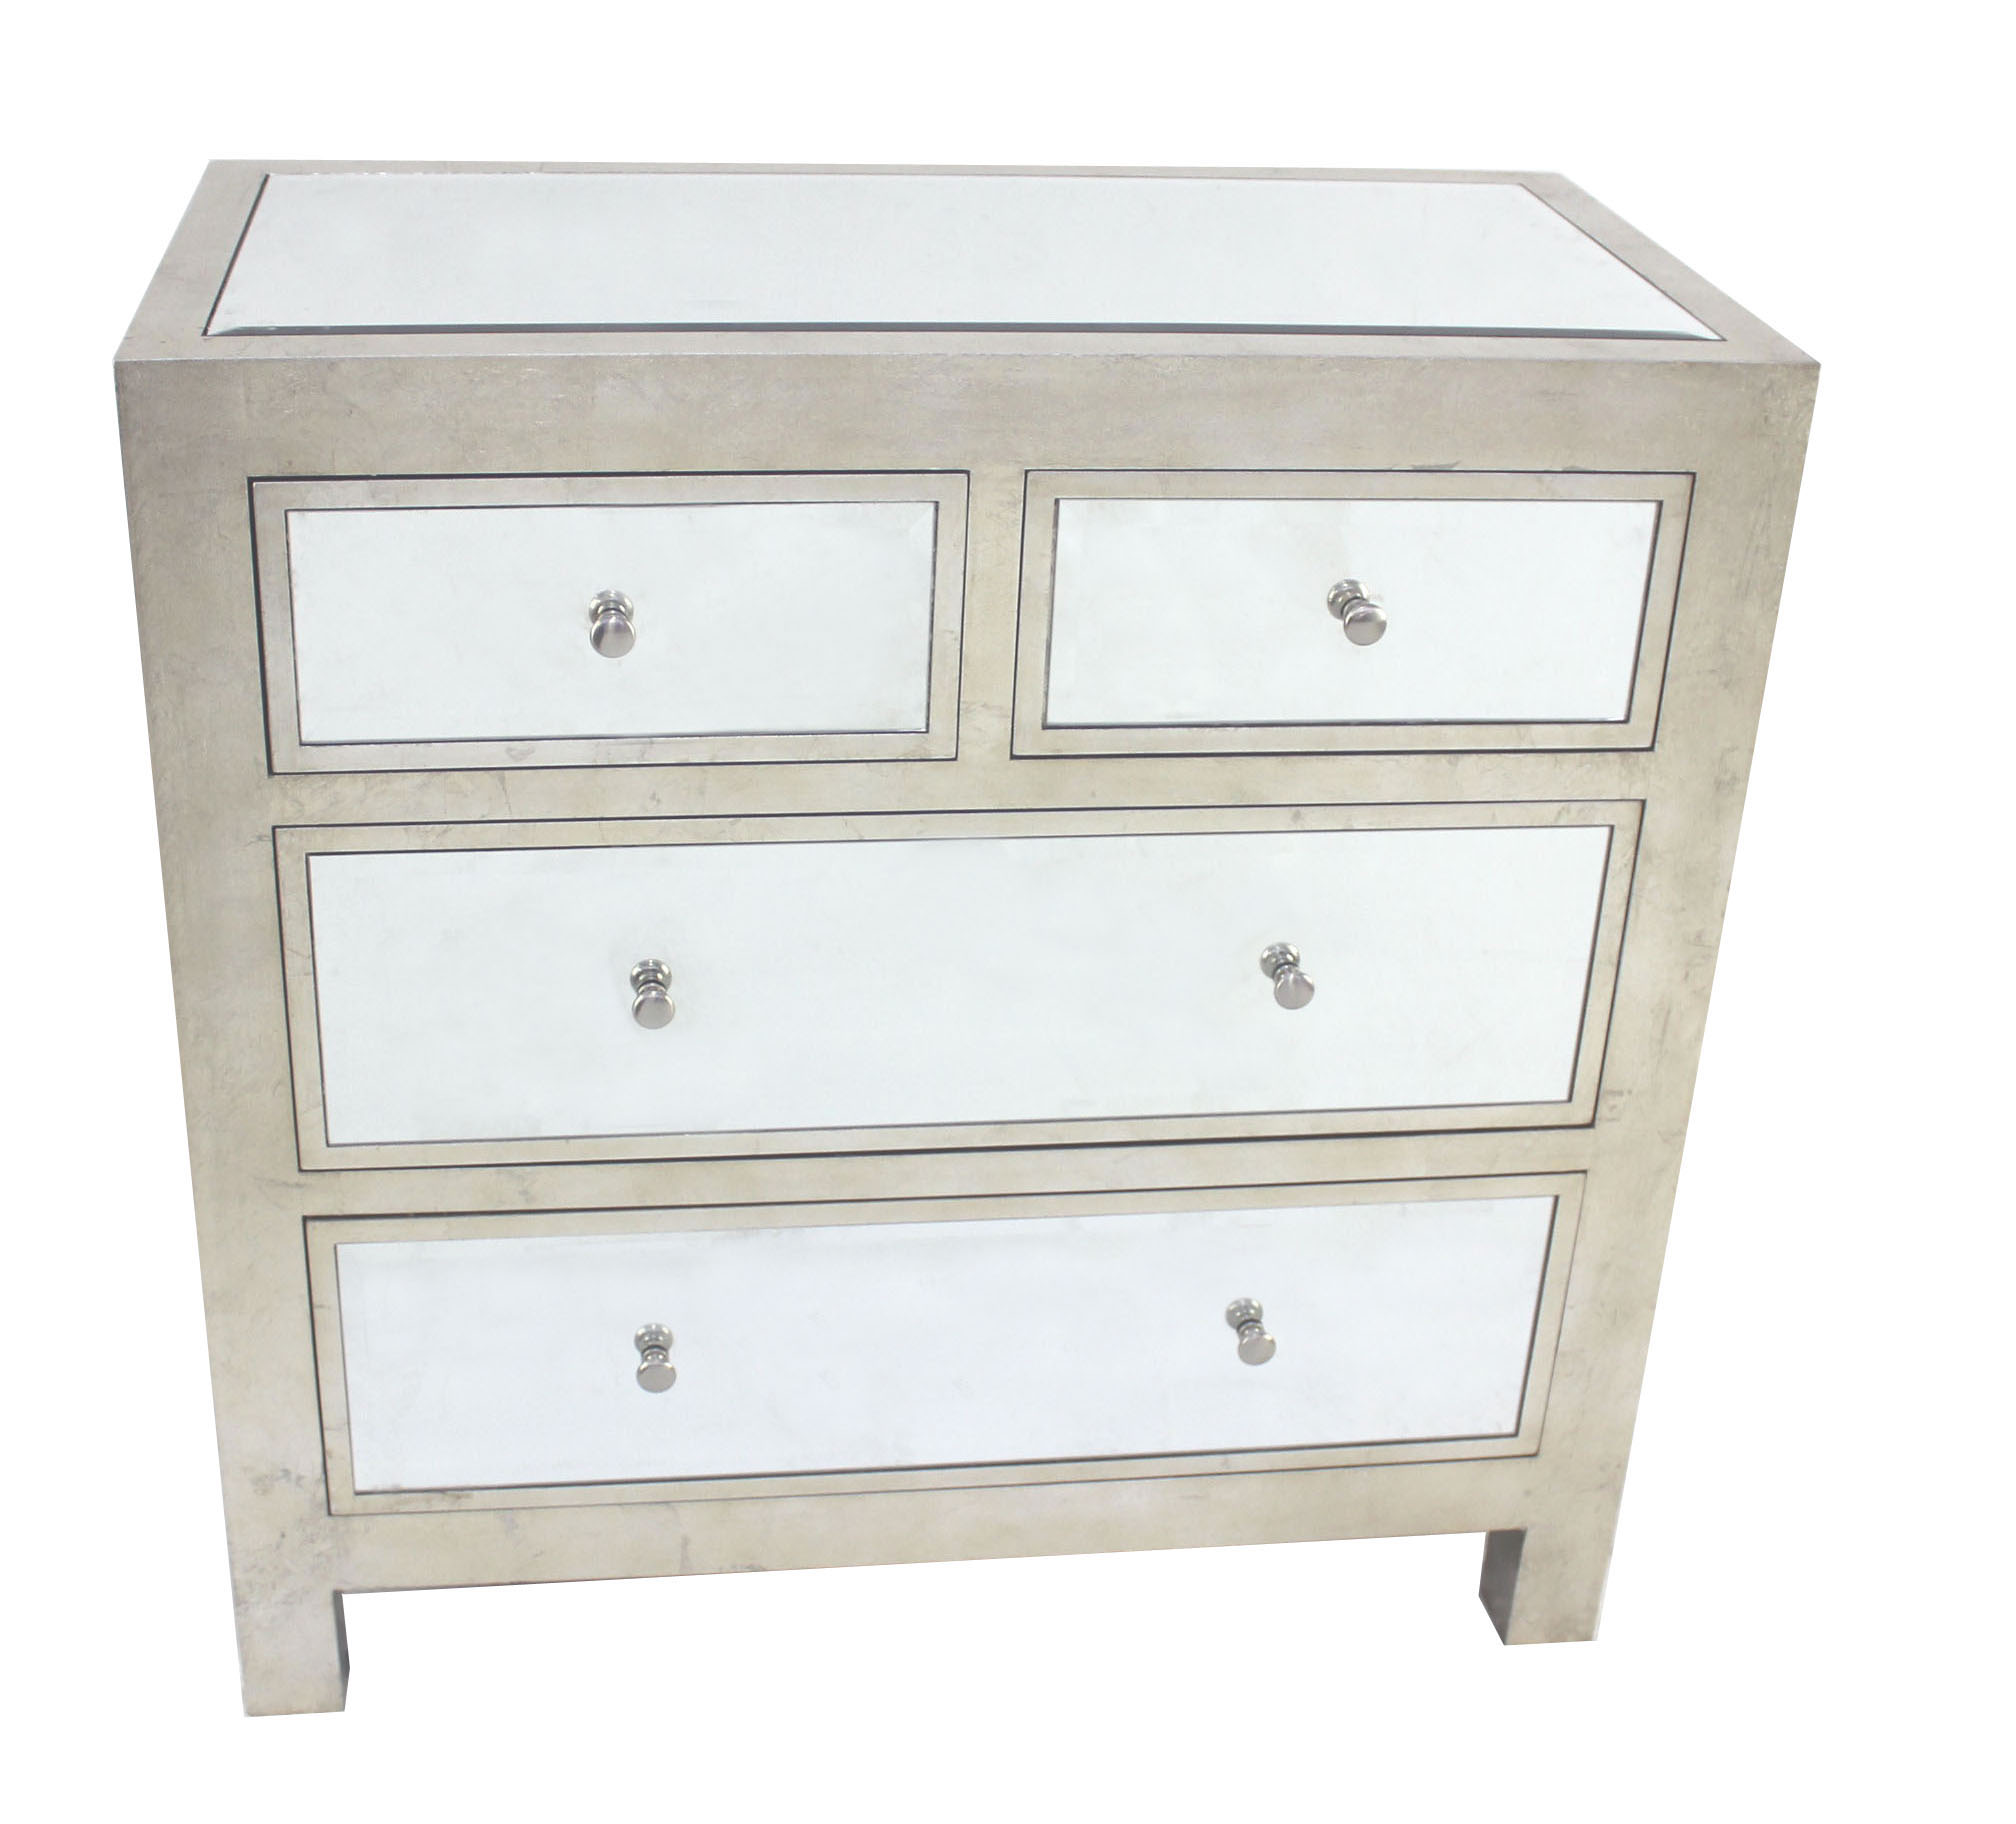 18" x 36" x 36" Silver, 4 Drawer, Mirrored, Wood - Cabinet